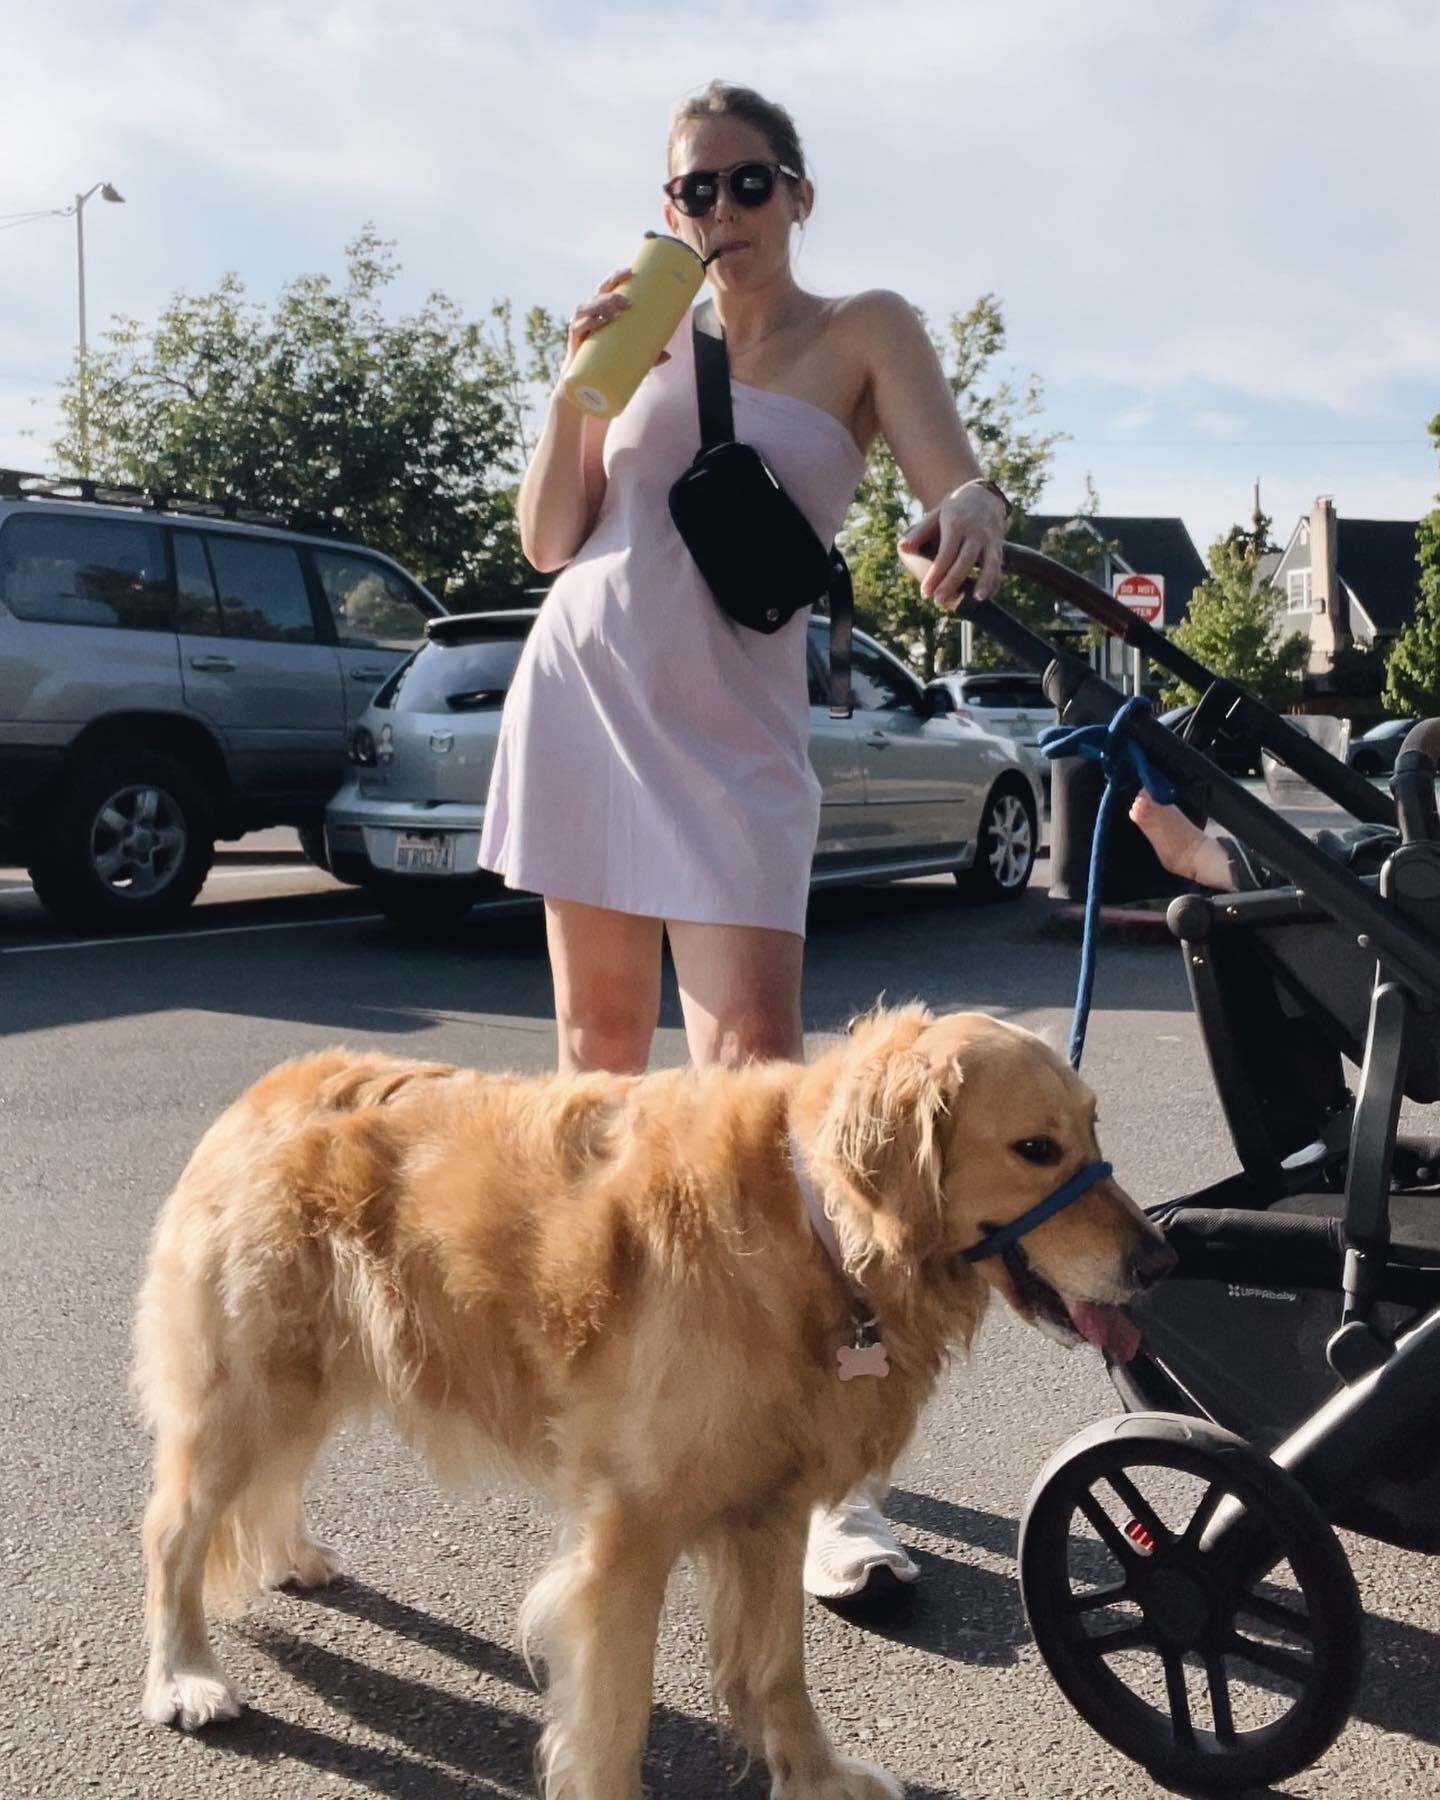 I&rsquo;m not a regular mom, I&rsquo;m a cool mom 💀 

can&rsquo;t tell you how much bravery it took me to bring the dog *and* the baby out for a walk the first time (so much coordination! so many logistics!) and now we&rsquo;re out here crushing the